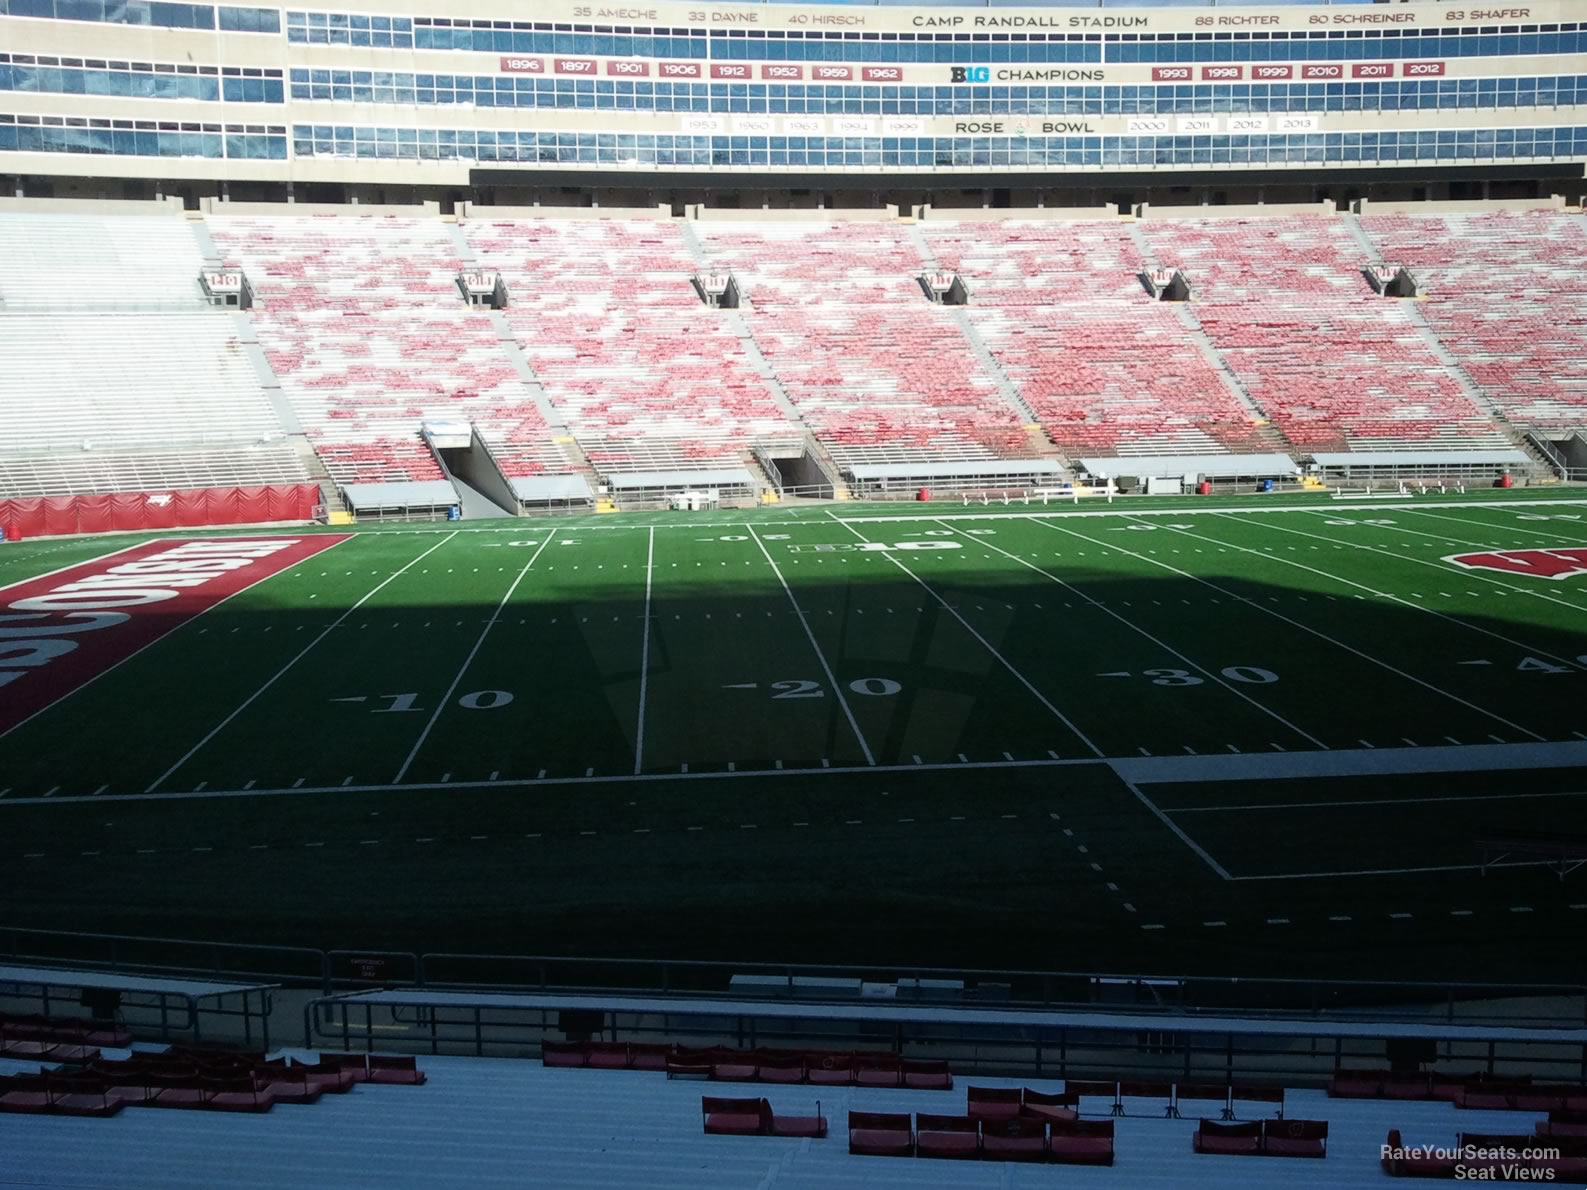 section g, row 30 seat view  - camp randall stadium